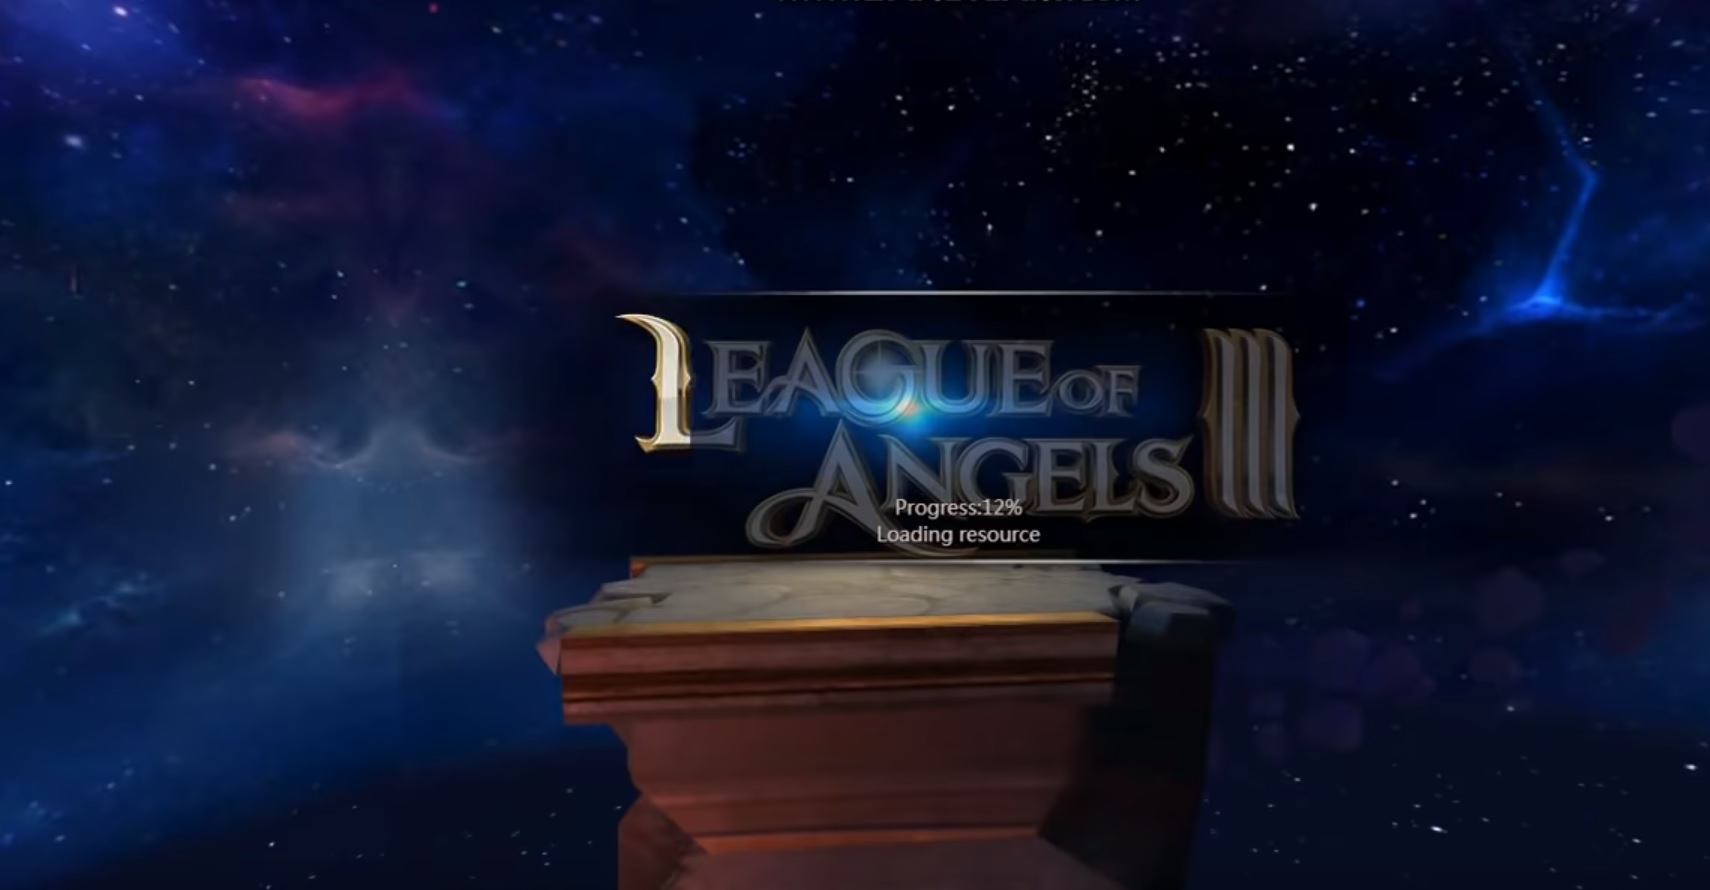 Earn money by playing League of Angels III